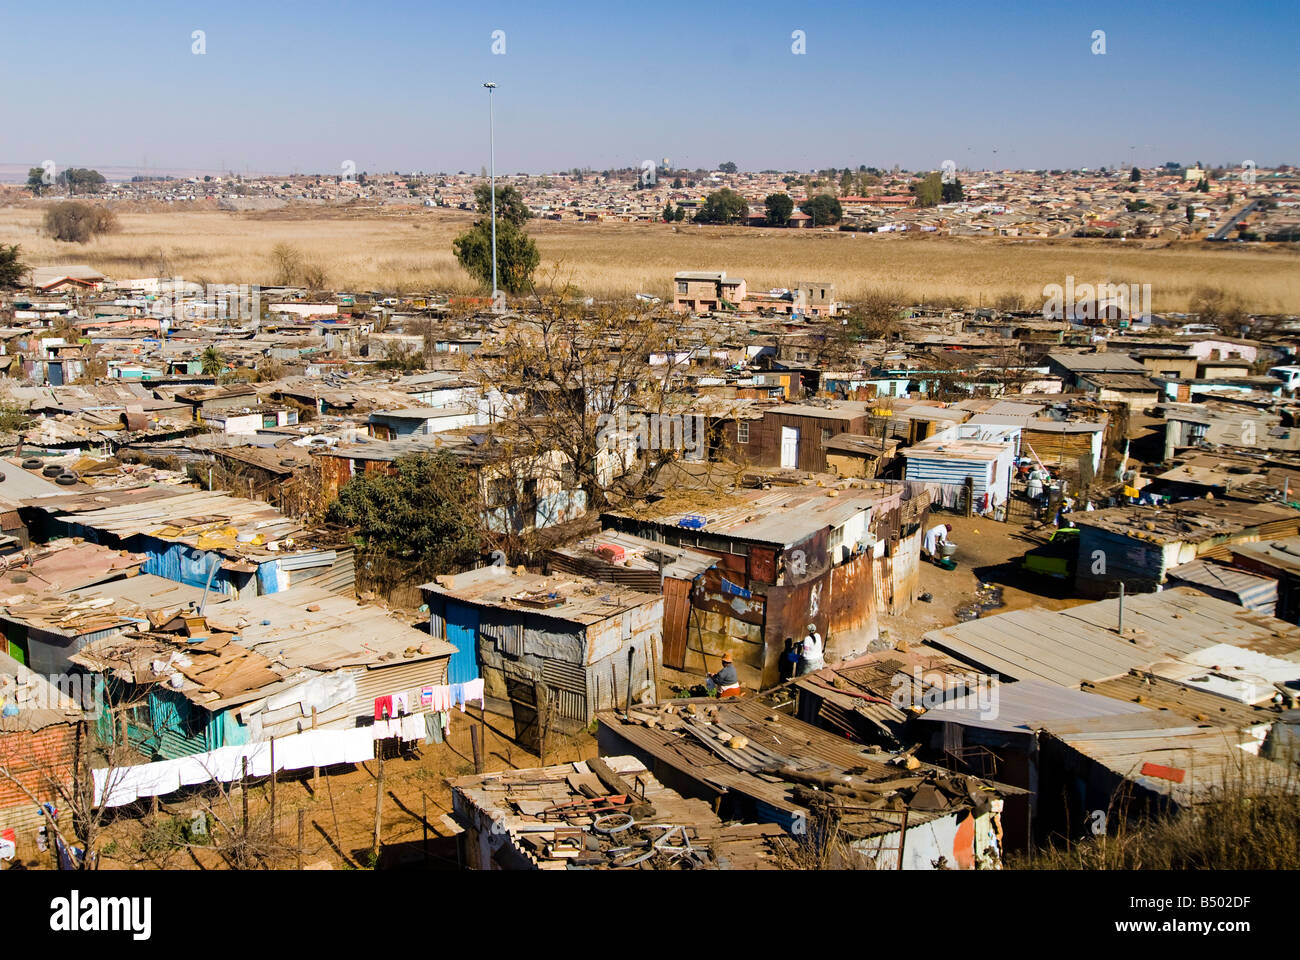 Township (in South Africa